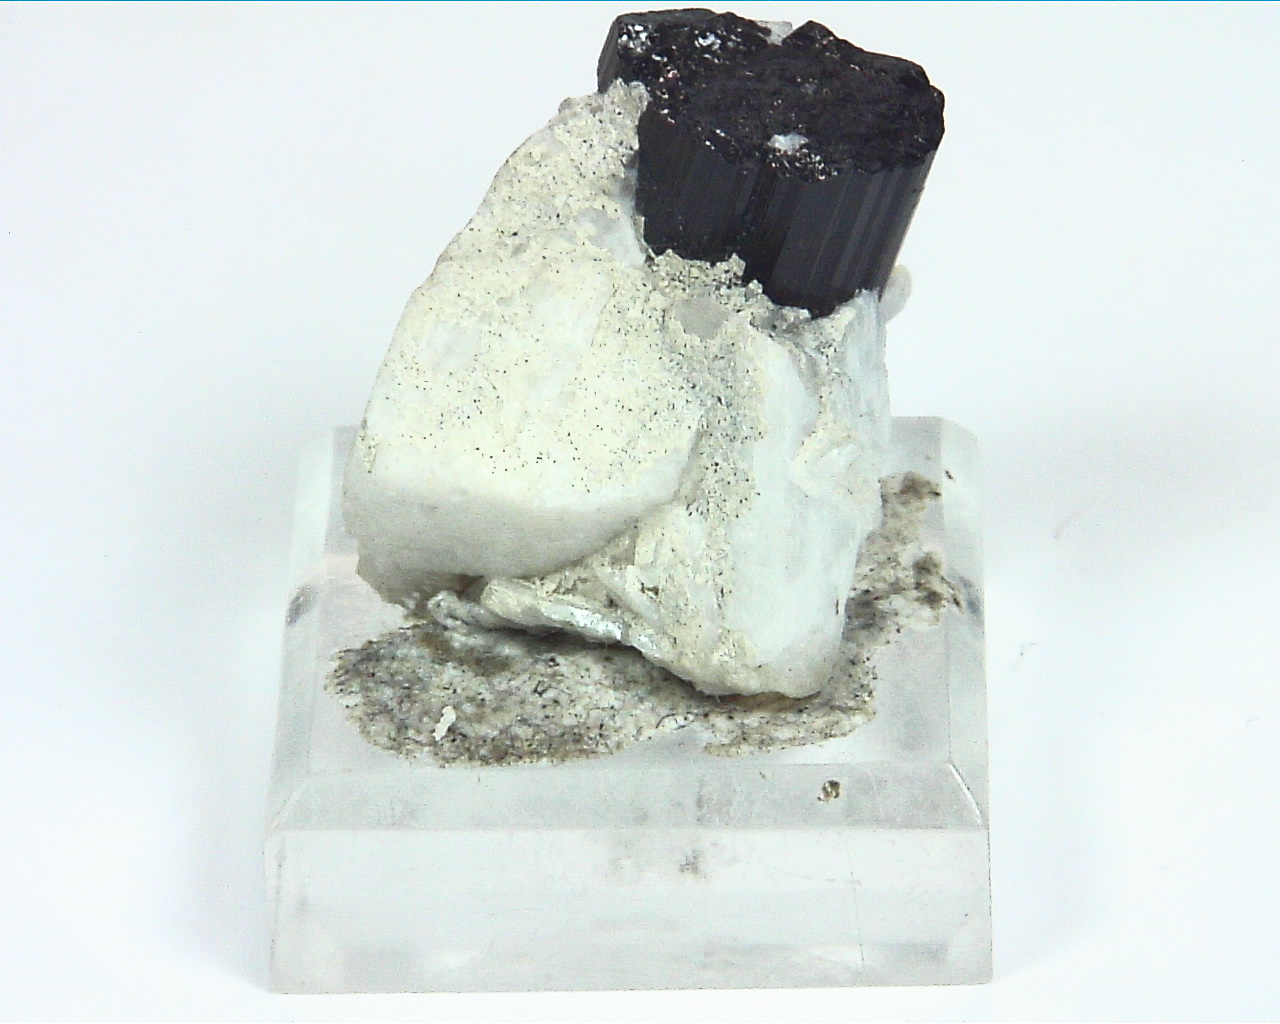 Quarts Crystal with Black Tourmaline Crystals,MS,786 2